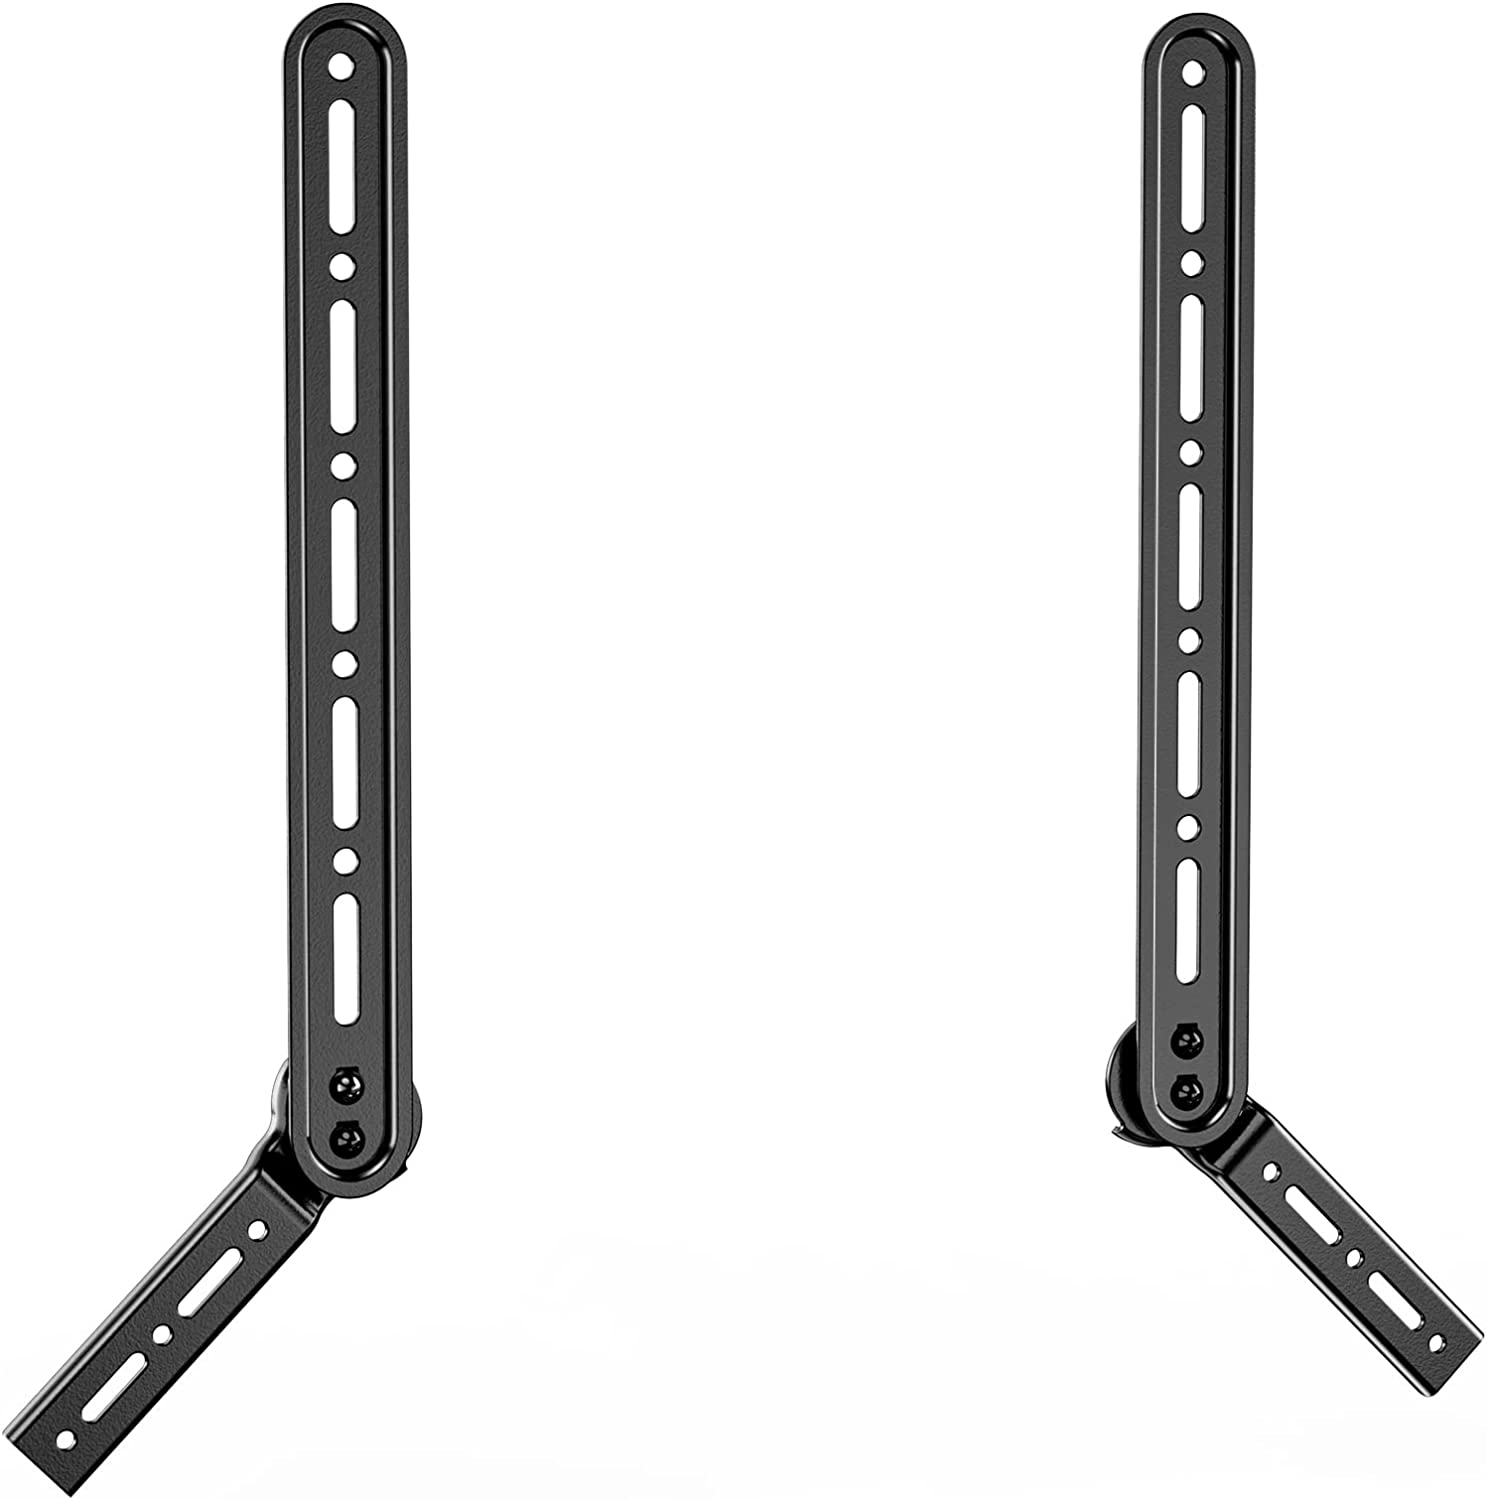 Amazon Prime Members: Prime Members: WALI Sound Bar Above or Under TV Mount Bracket (Fits TVs 23" to 65") $6 + Free Shipping w/ Prime or on $25+